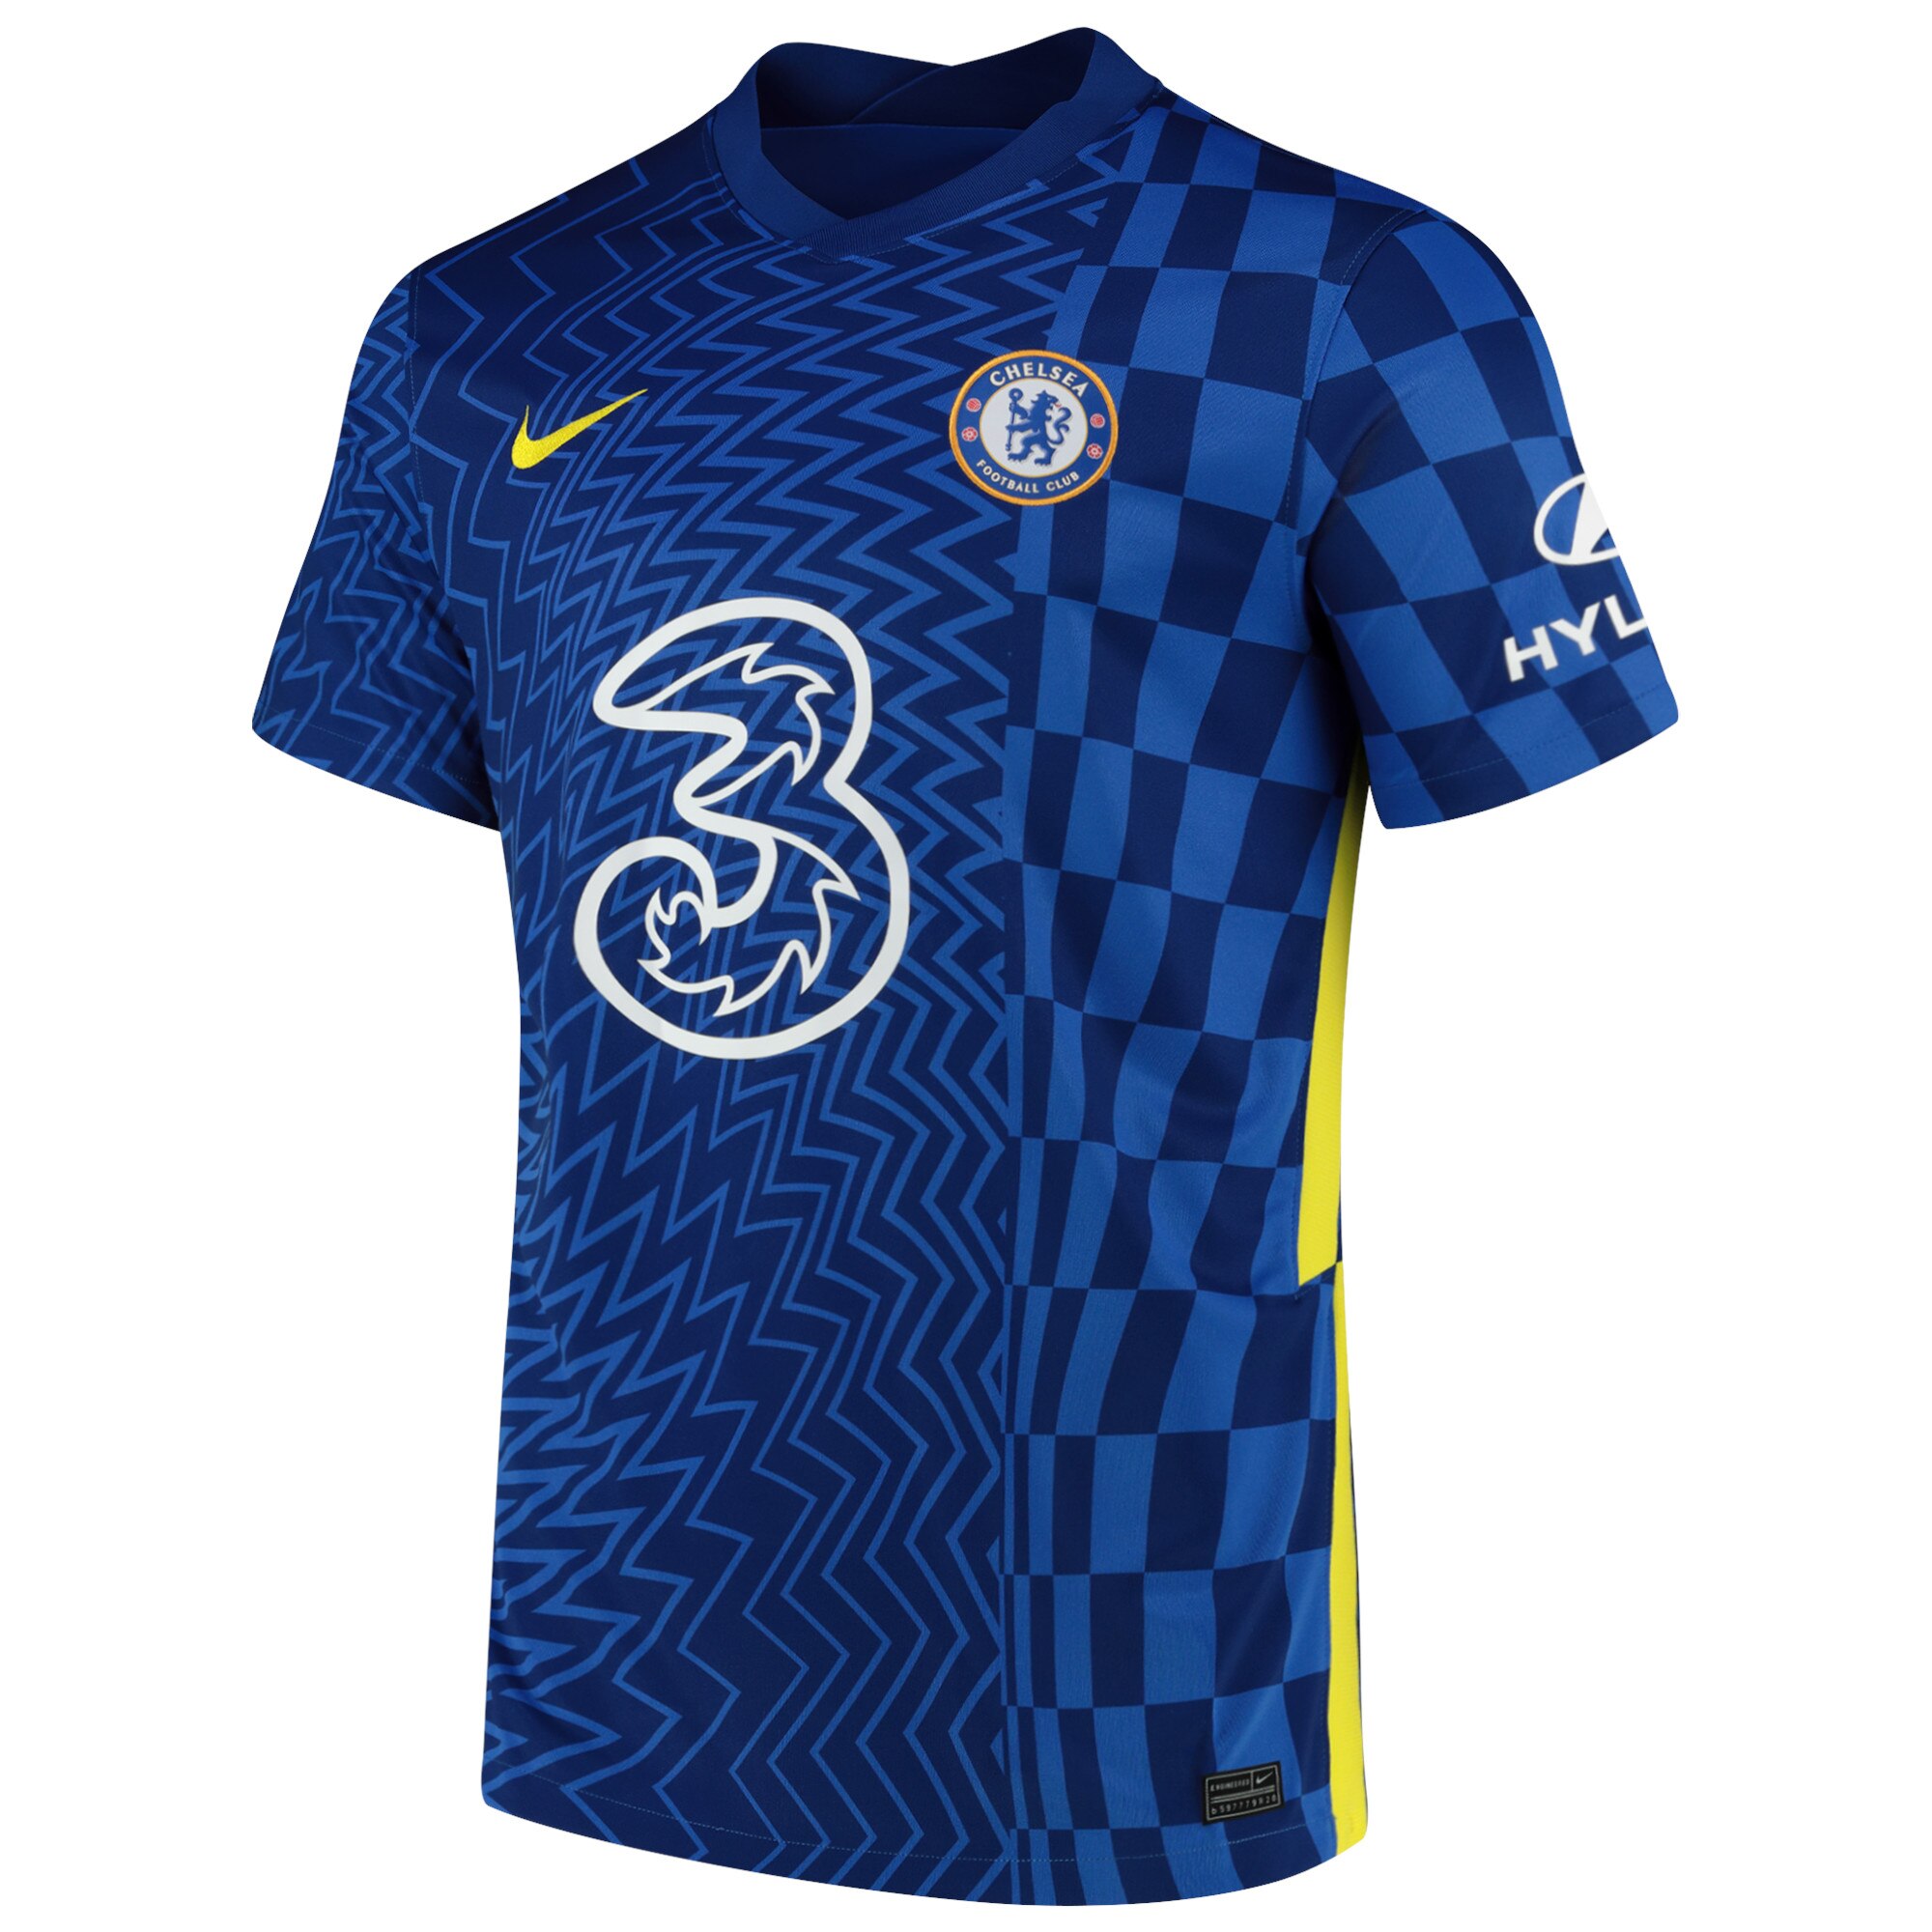 Chelsea Cup Home Stadium Shirt 2021-22 with James 19 printing